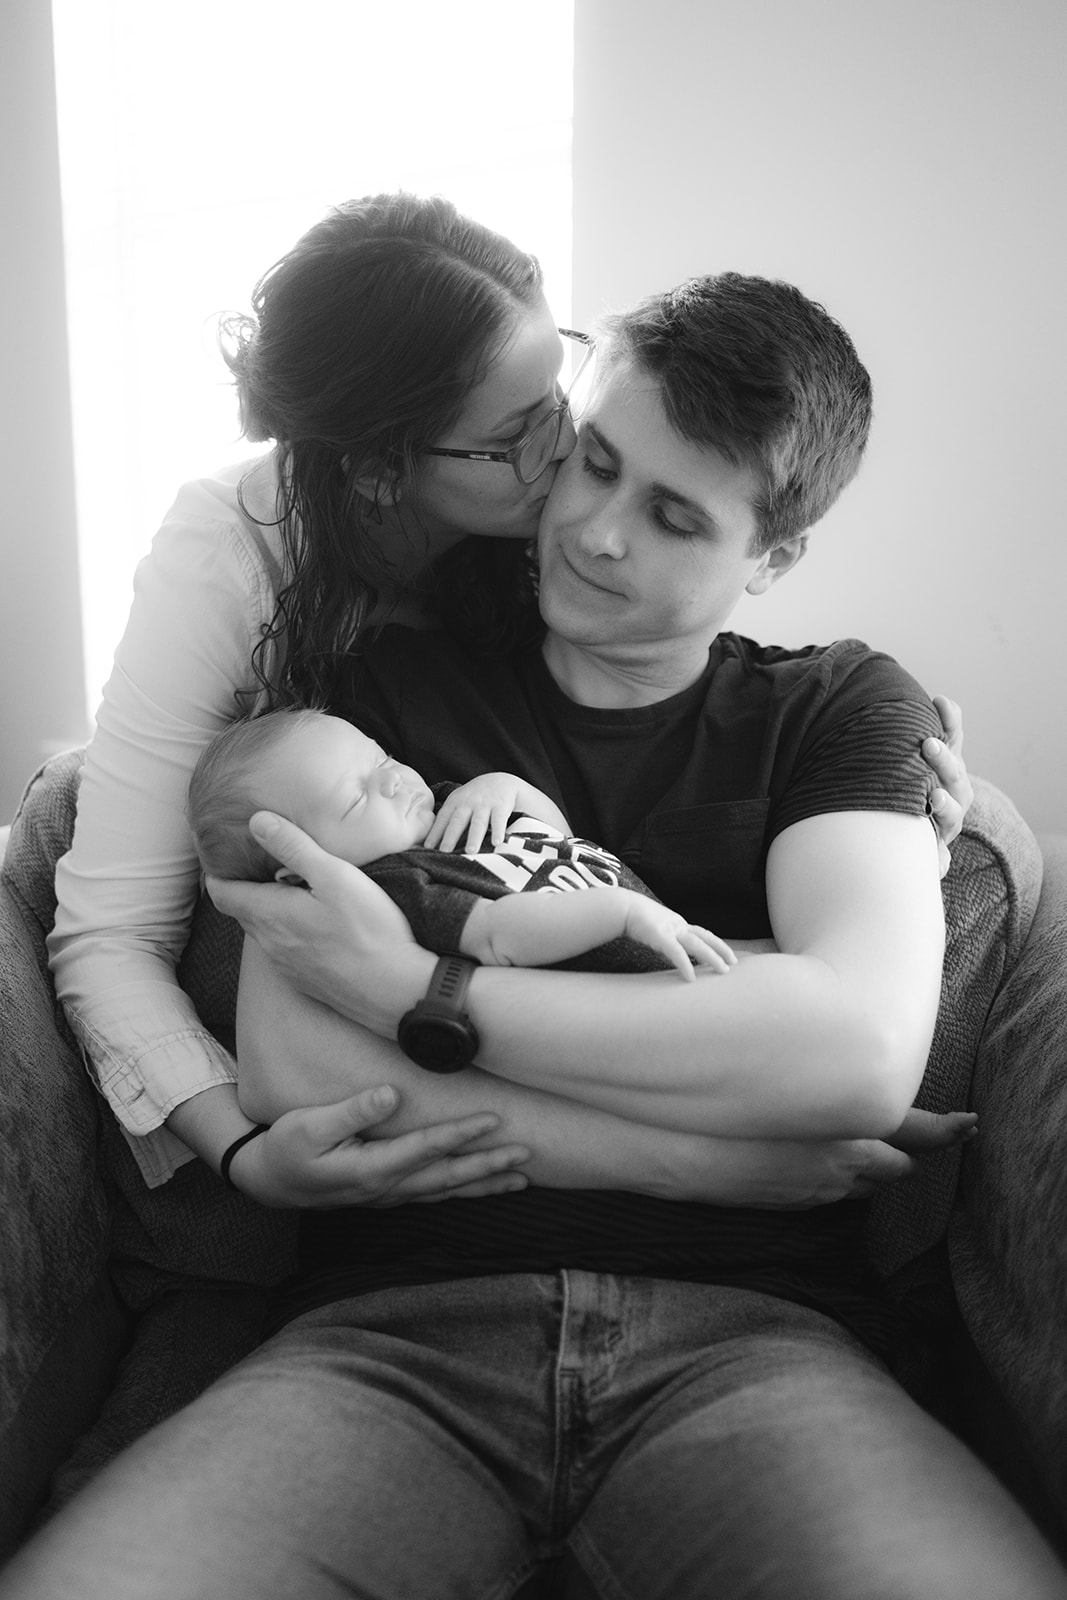 wife kisses husband while holding their newborn baby